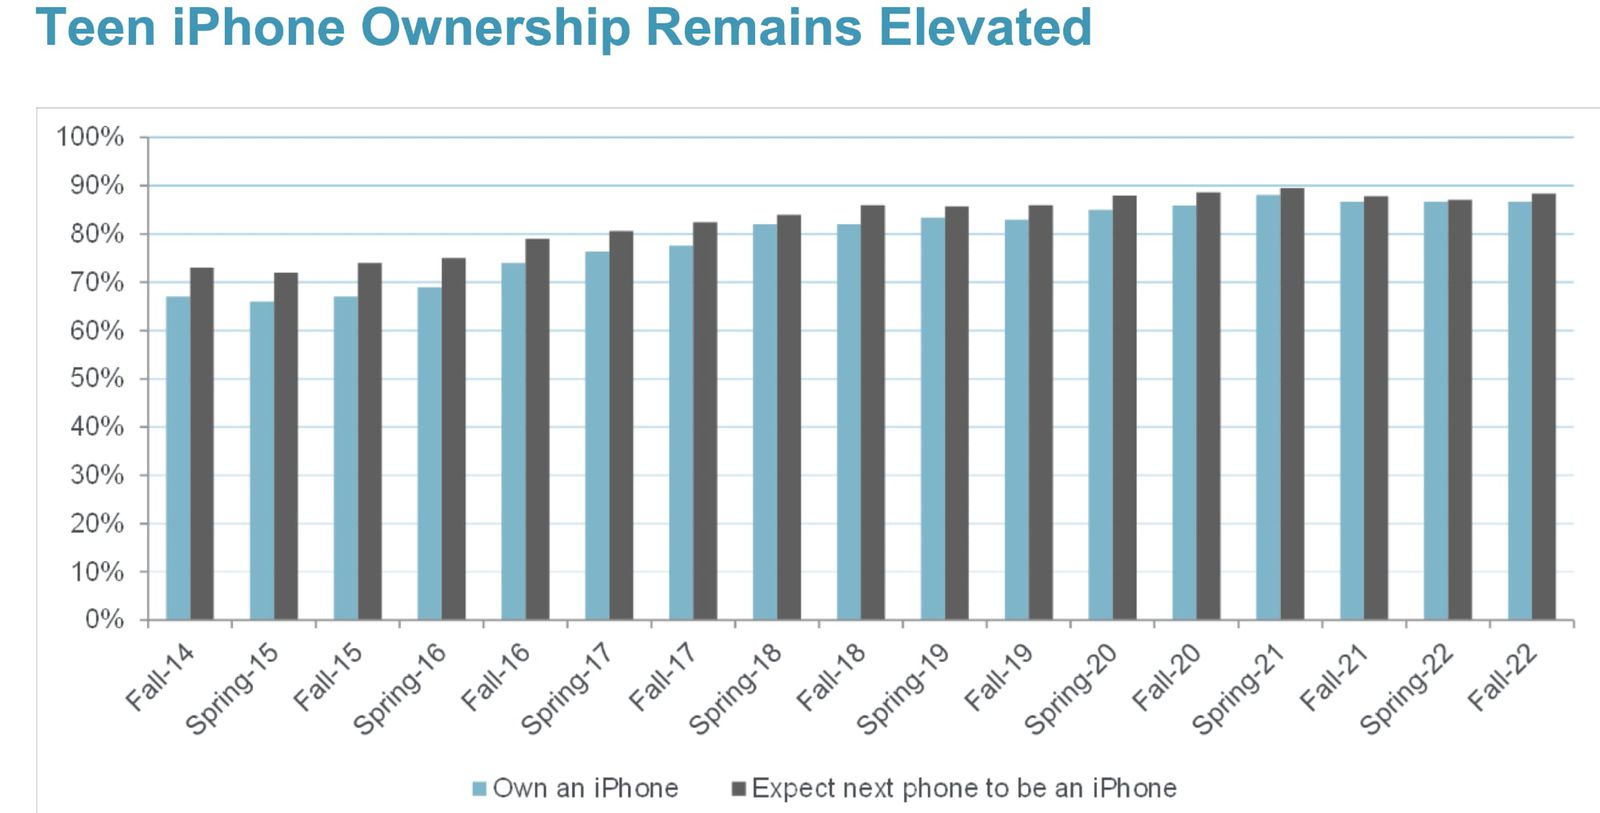 In the United States, 87% of teens own an iPhone